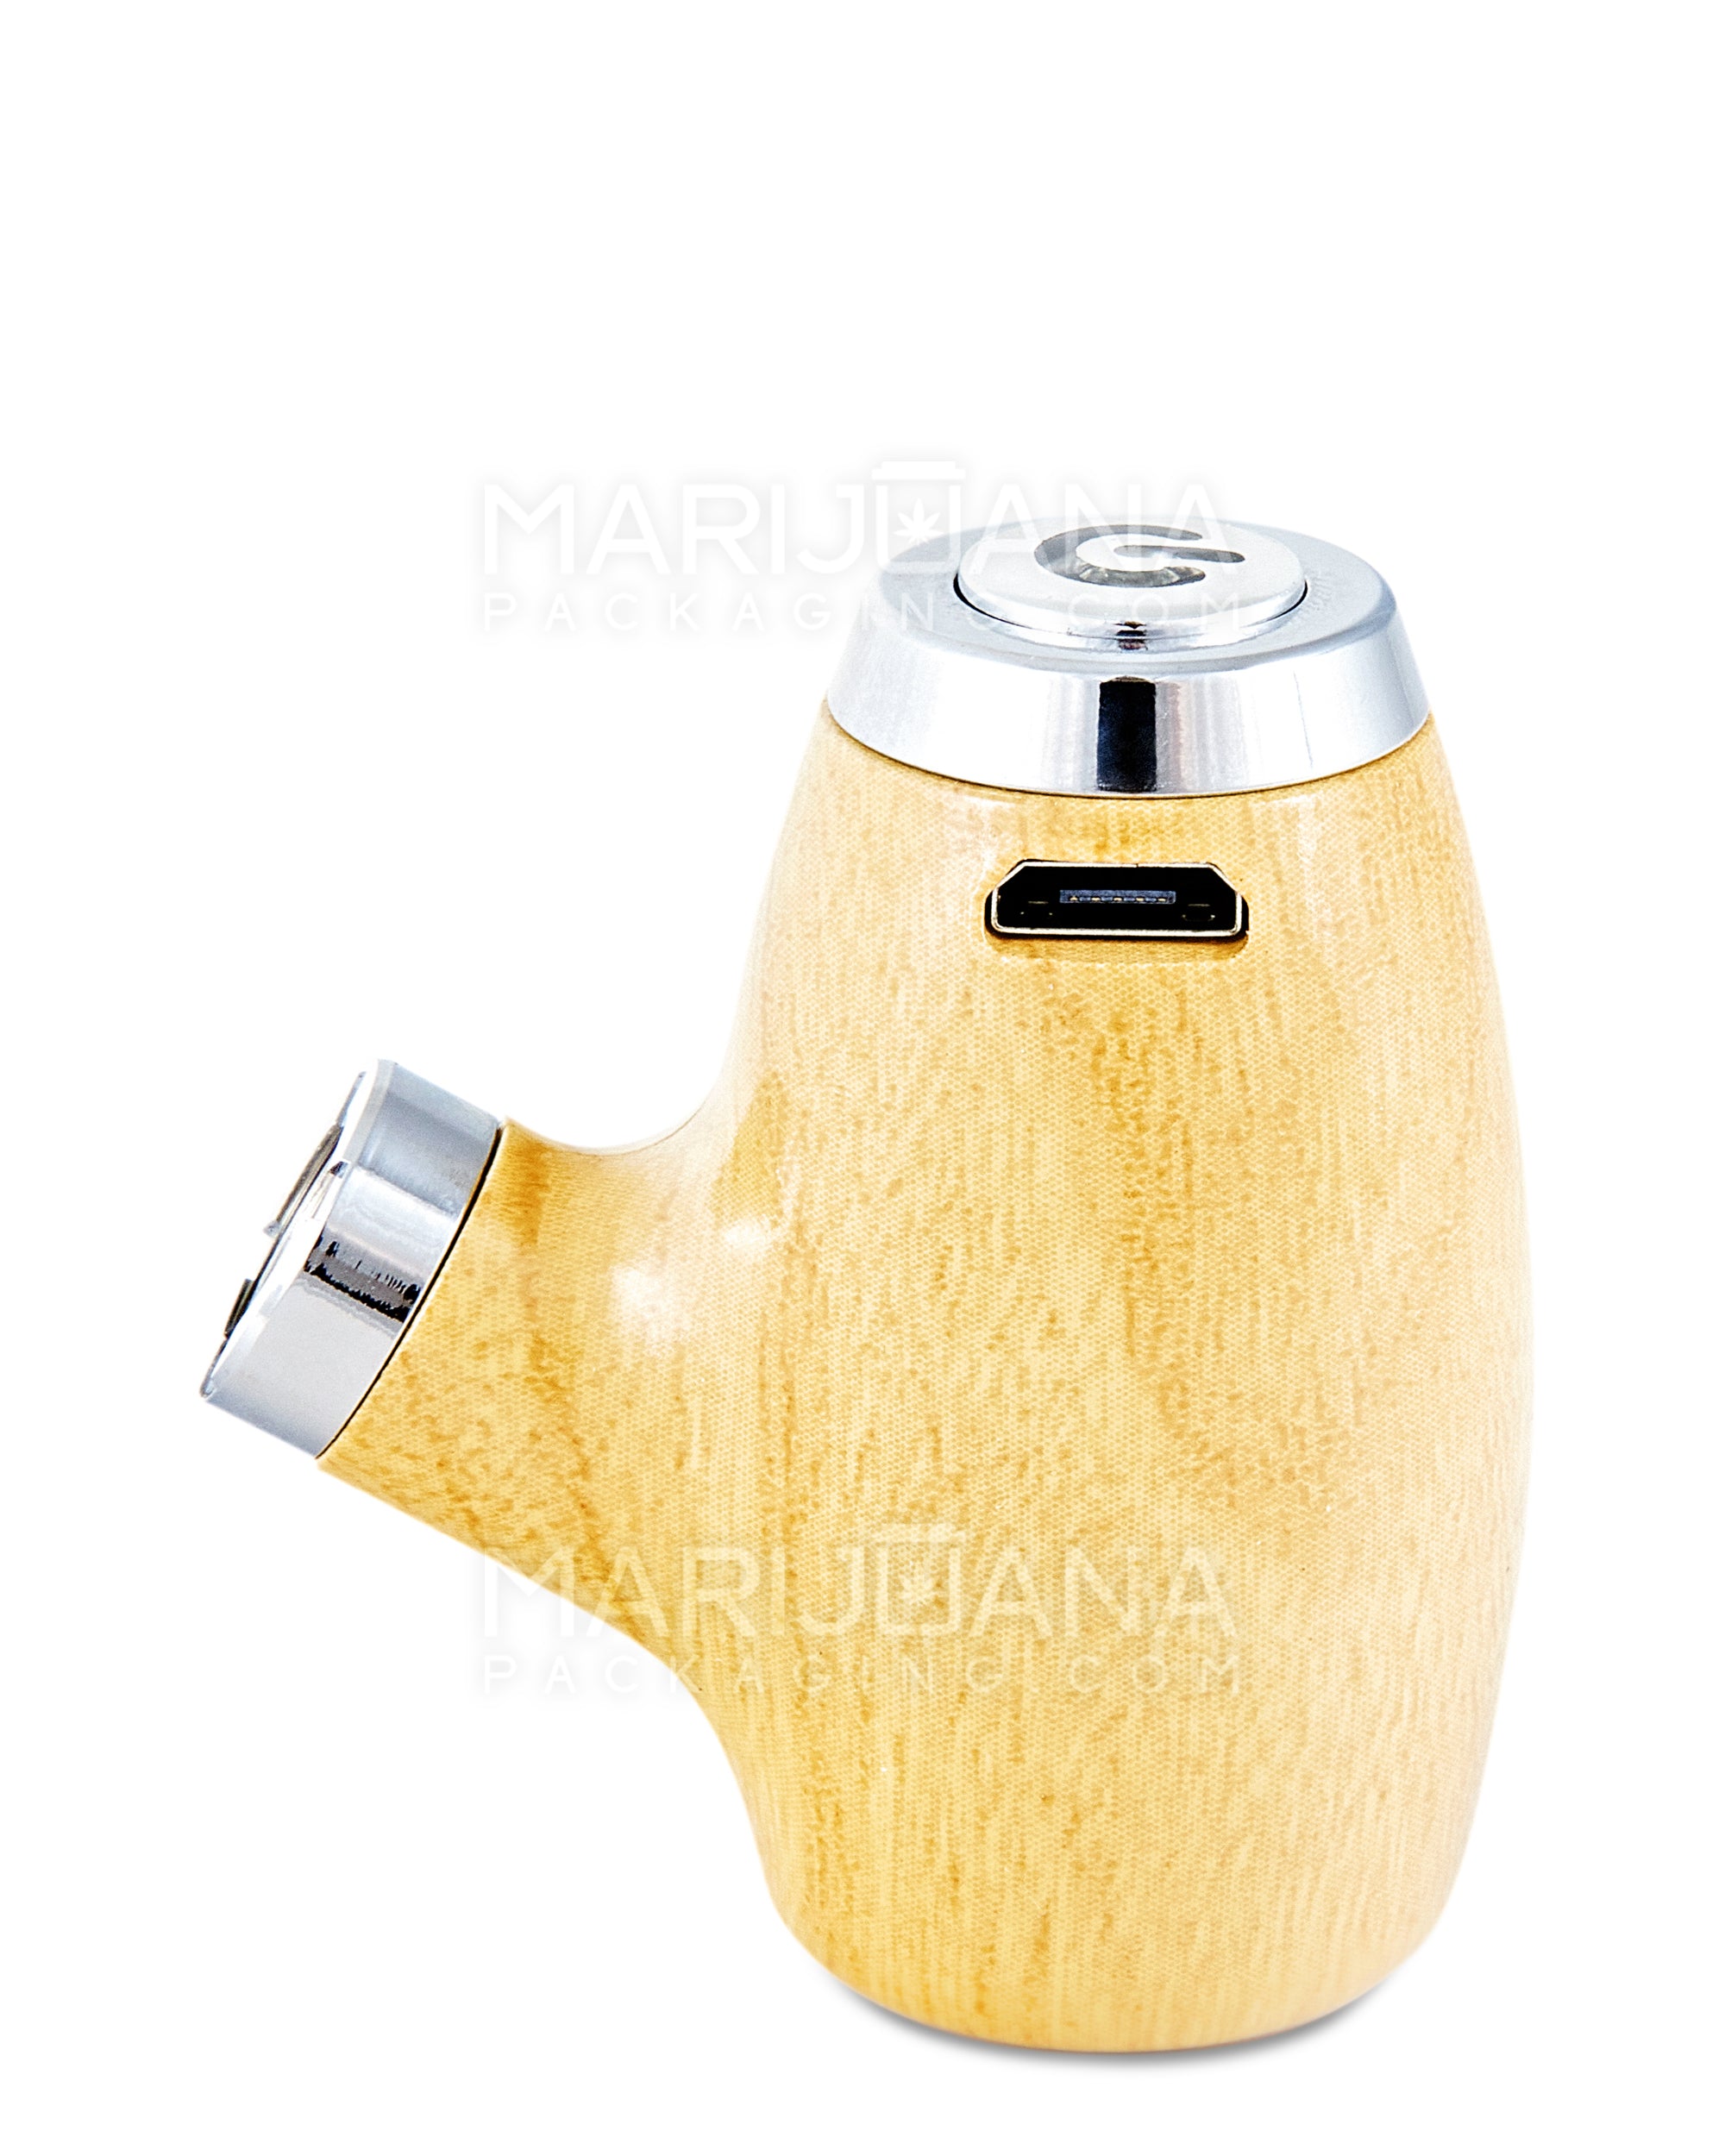 Variable Voltage "Old Man's Pipe" Shaped Vape Cartridge Battery | 900mah - Spruce Wood - 510 Thread - 3